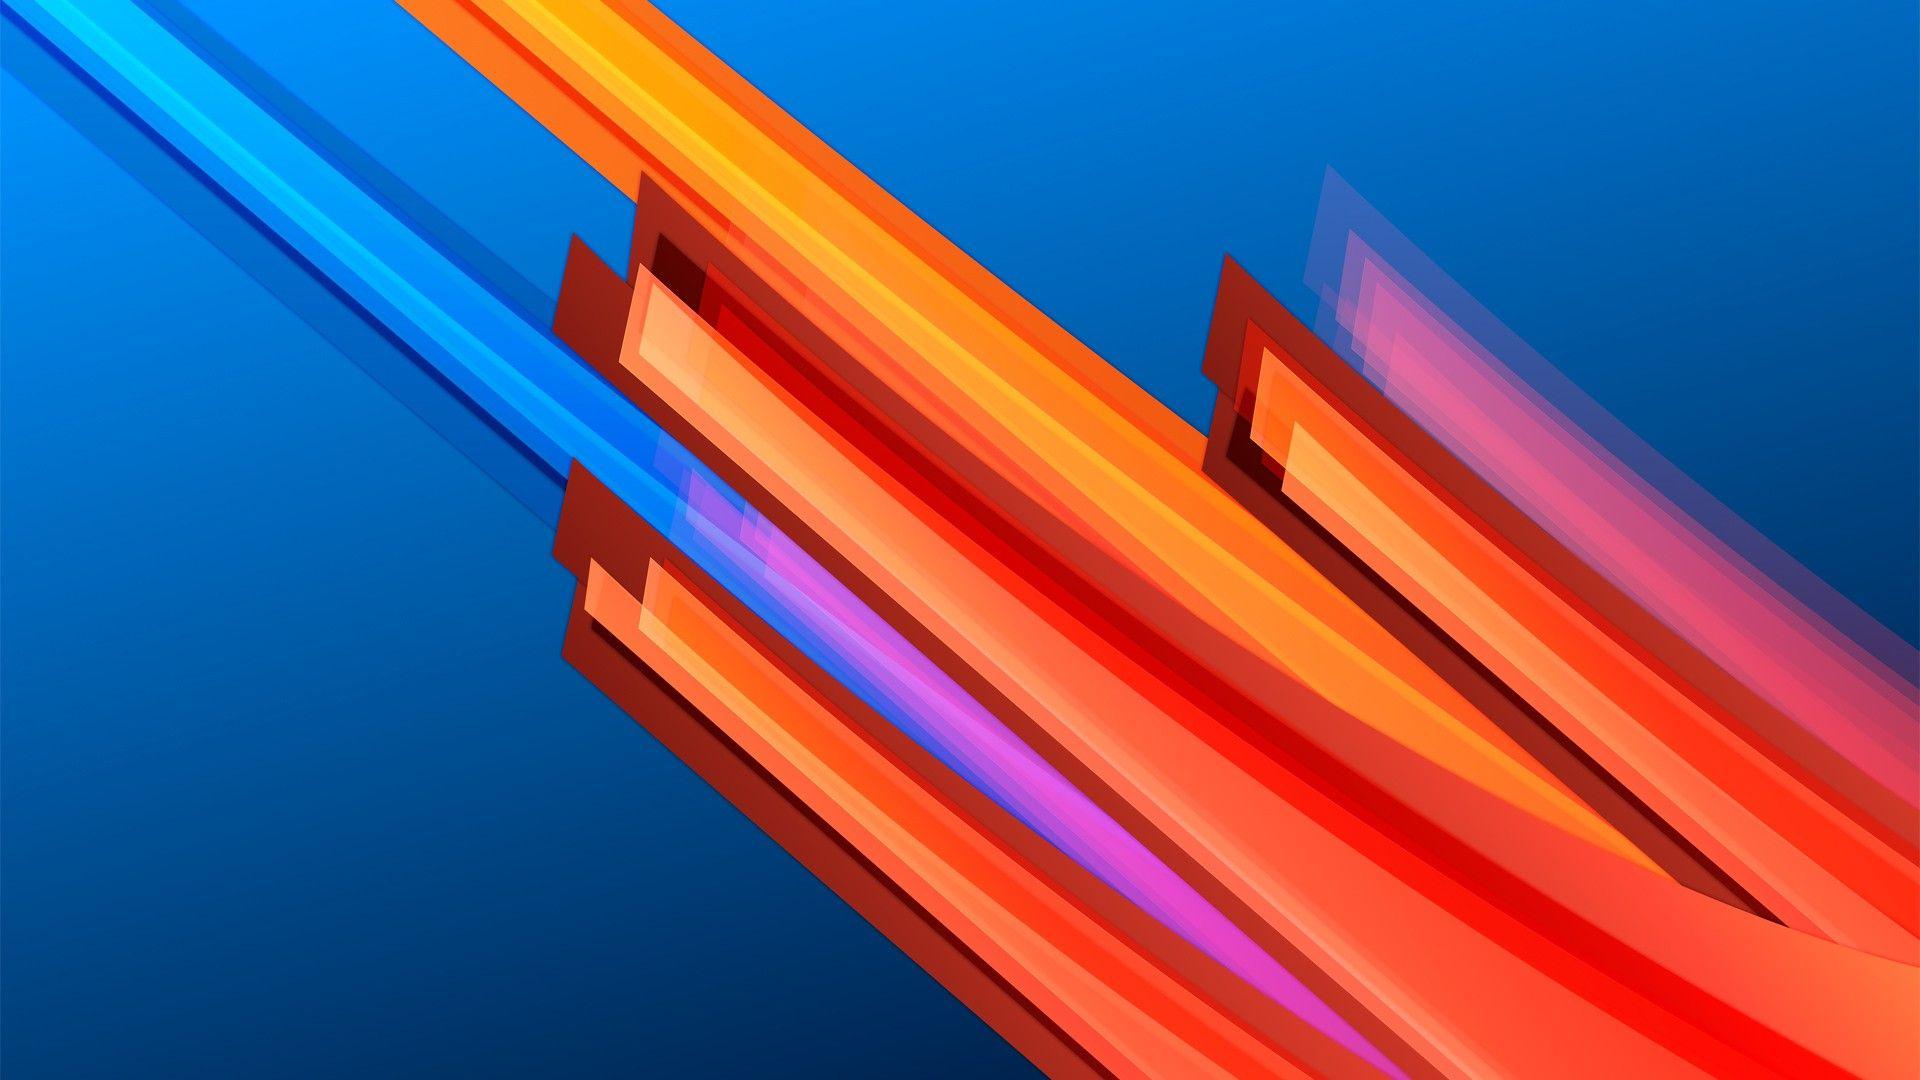 Blue and Orange Abstract Wallpapers - Top Free Blue and Orange Abstract Backgrounds